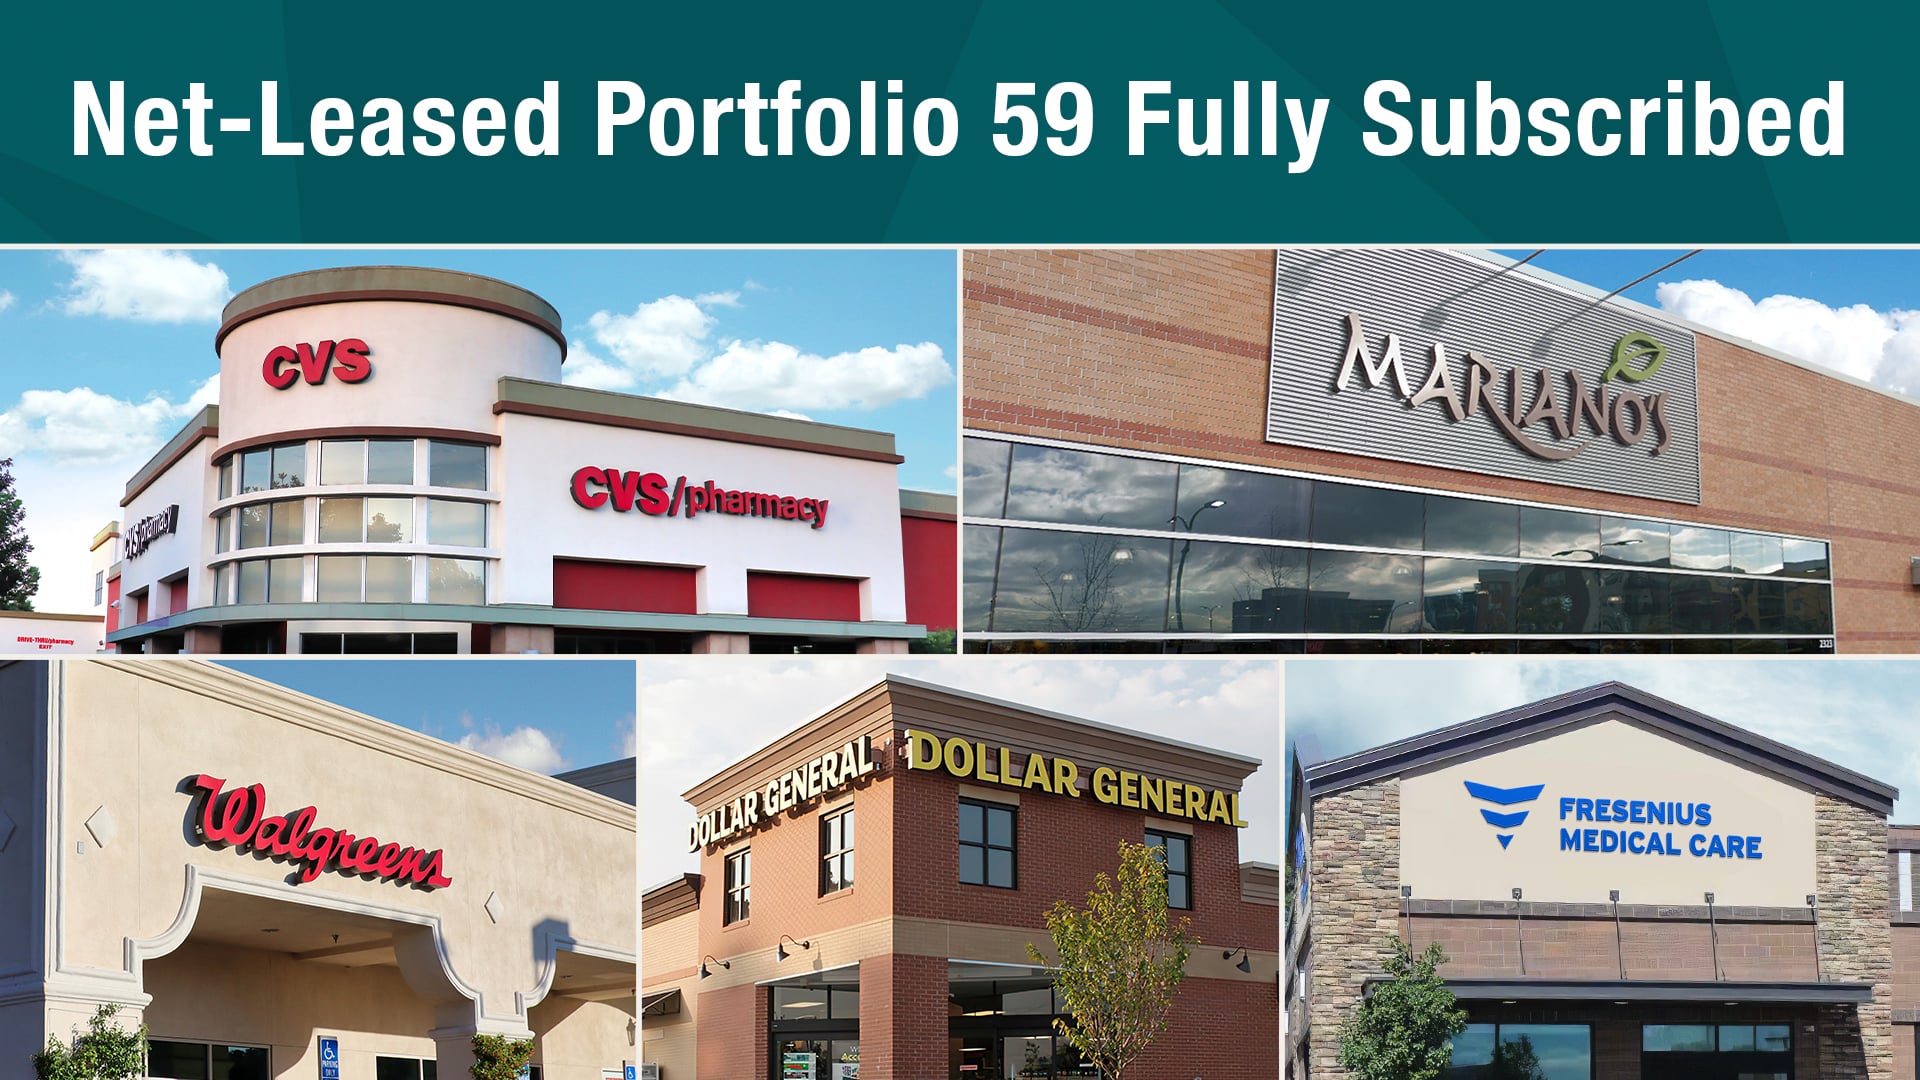 Net-Leased Portfolio 59 - Fully Subscribed